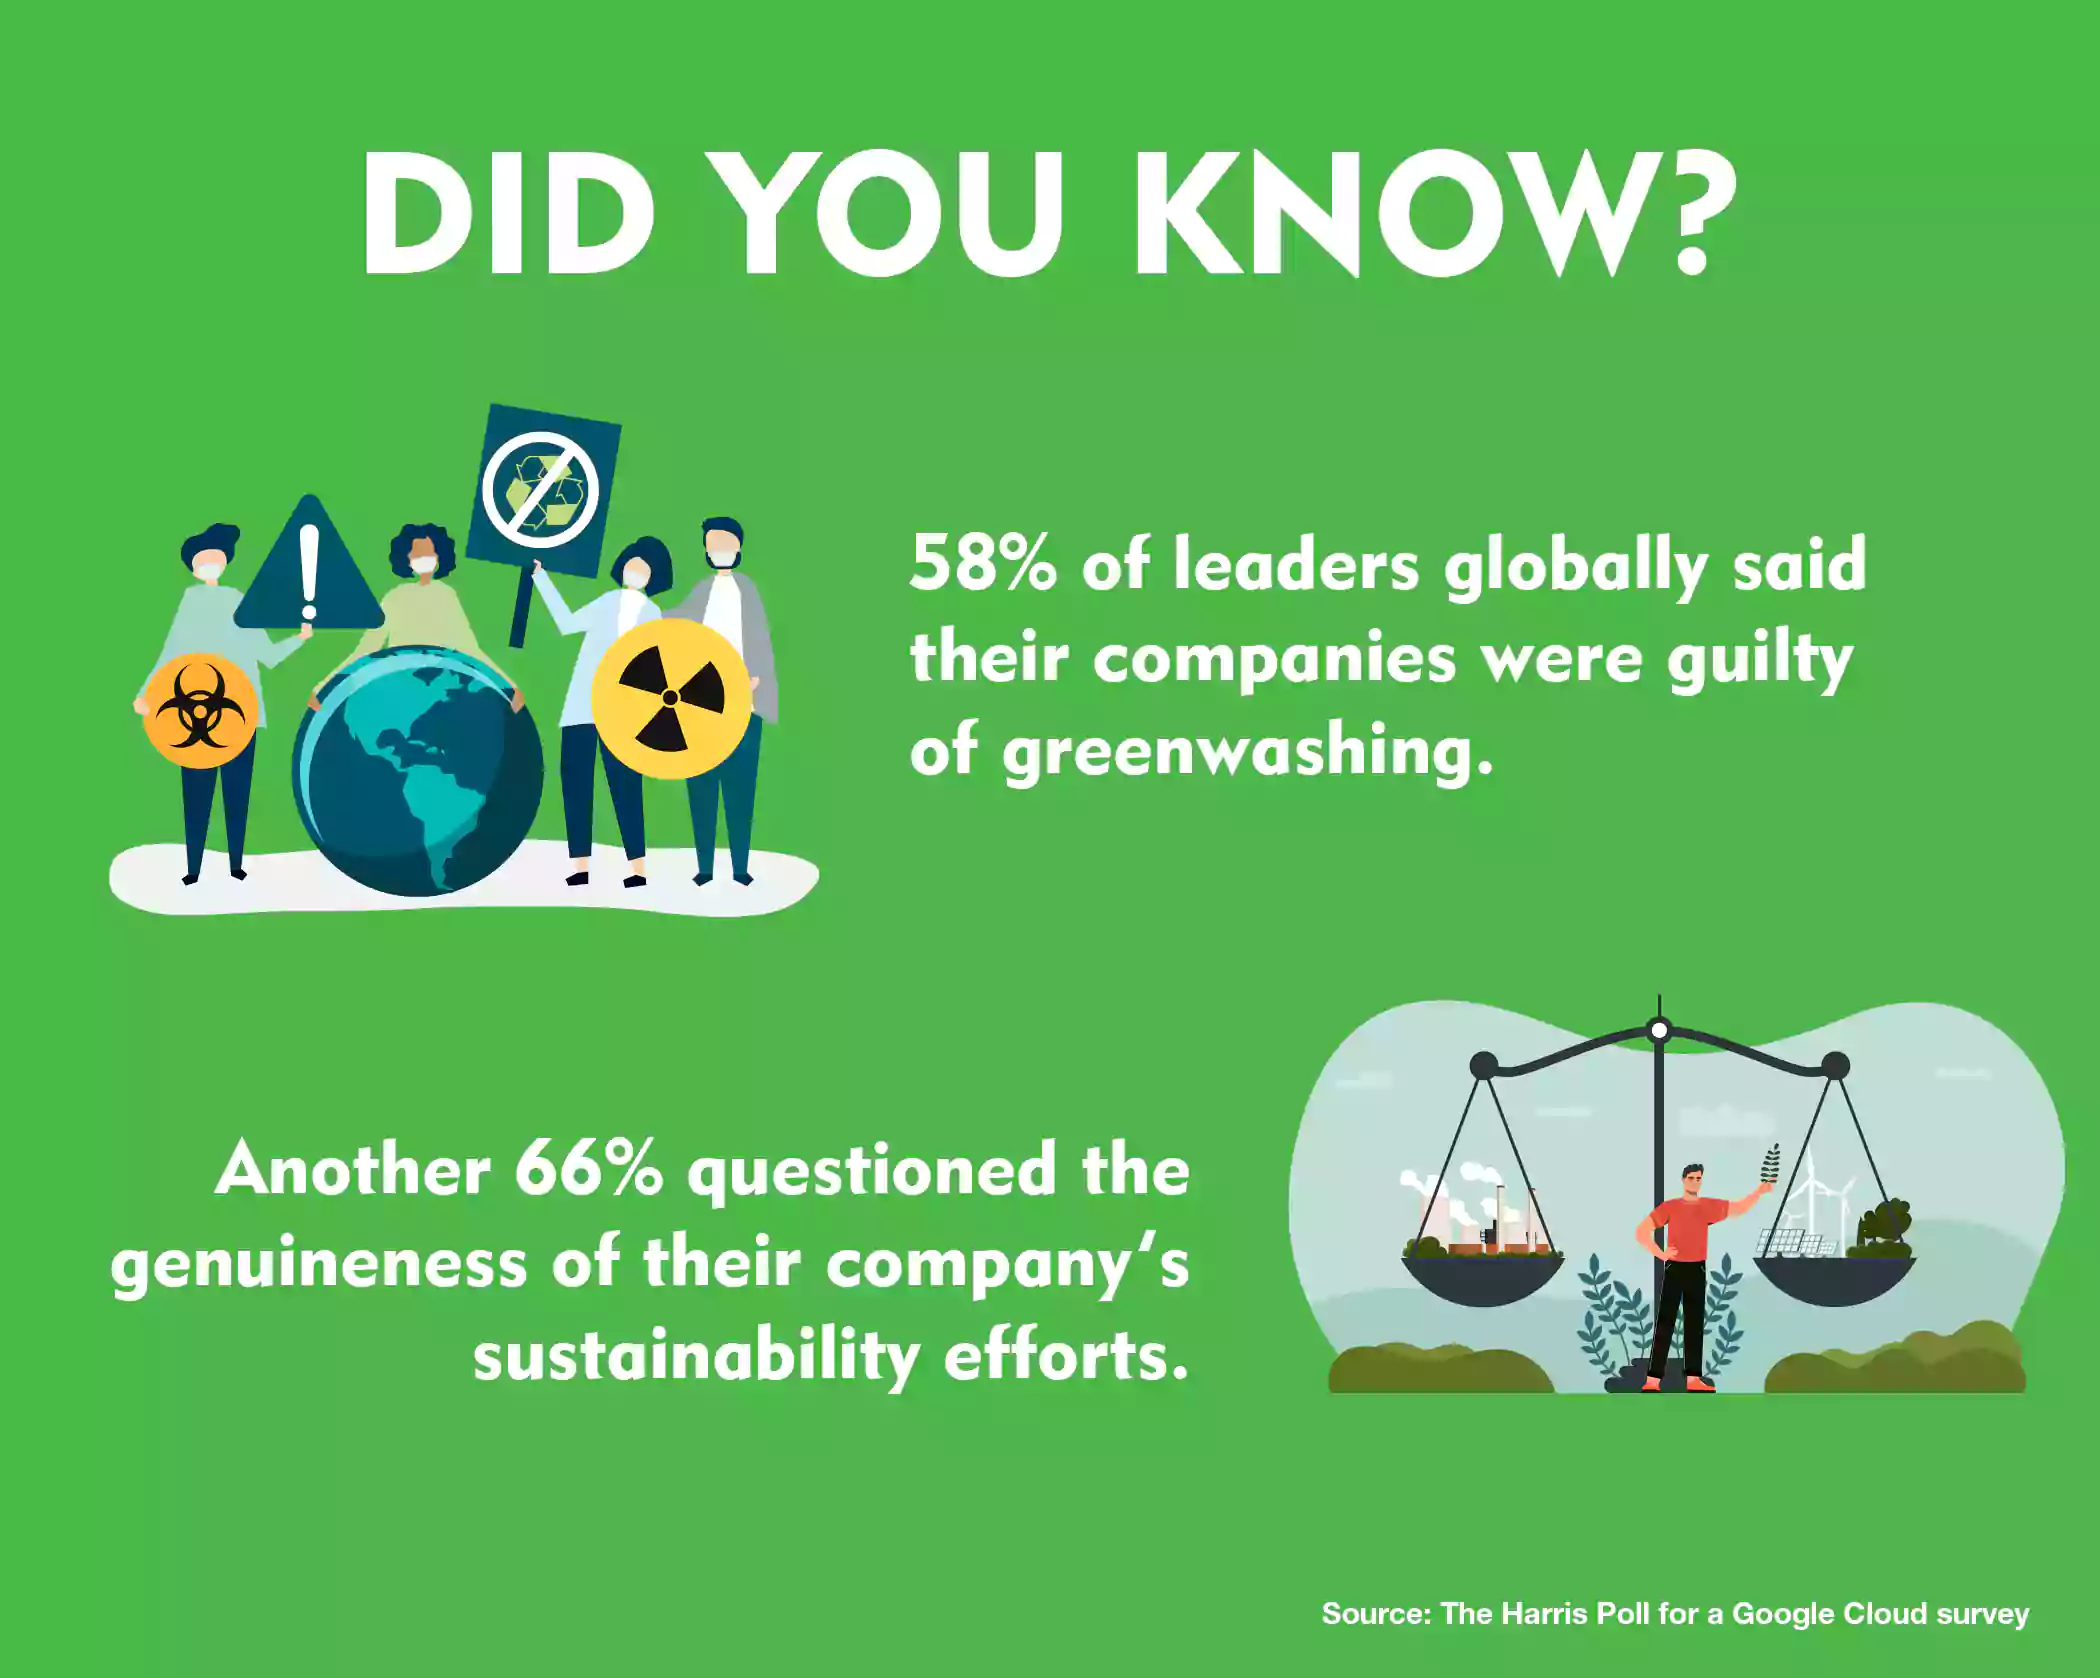 Facts about greenwashing